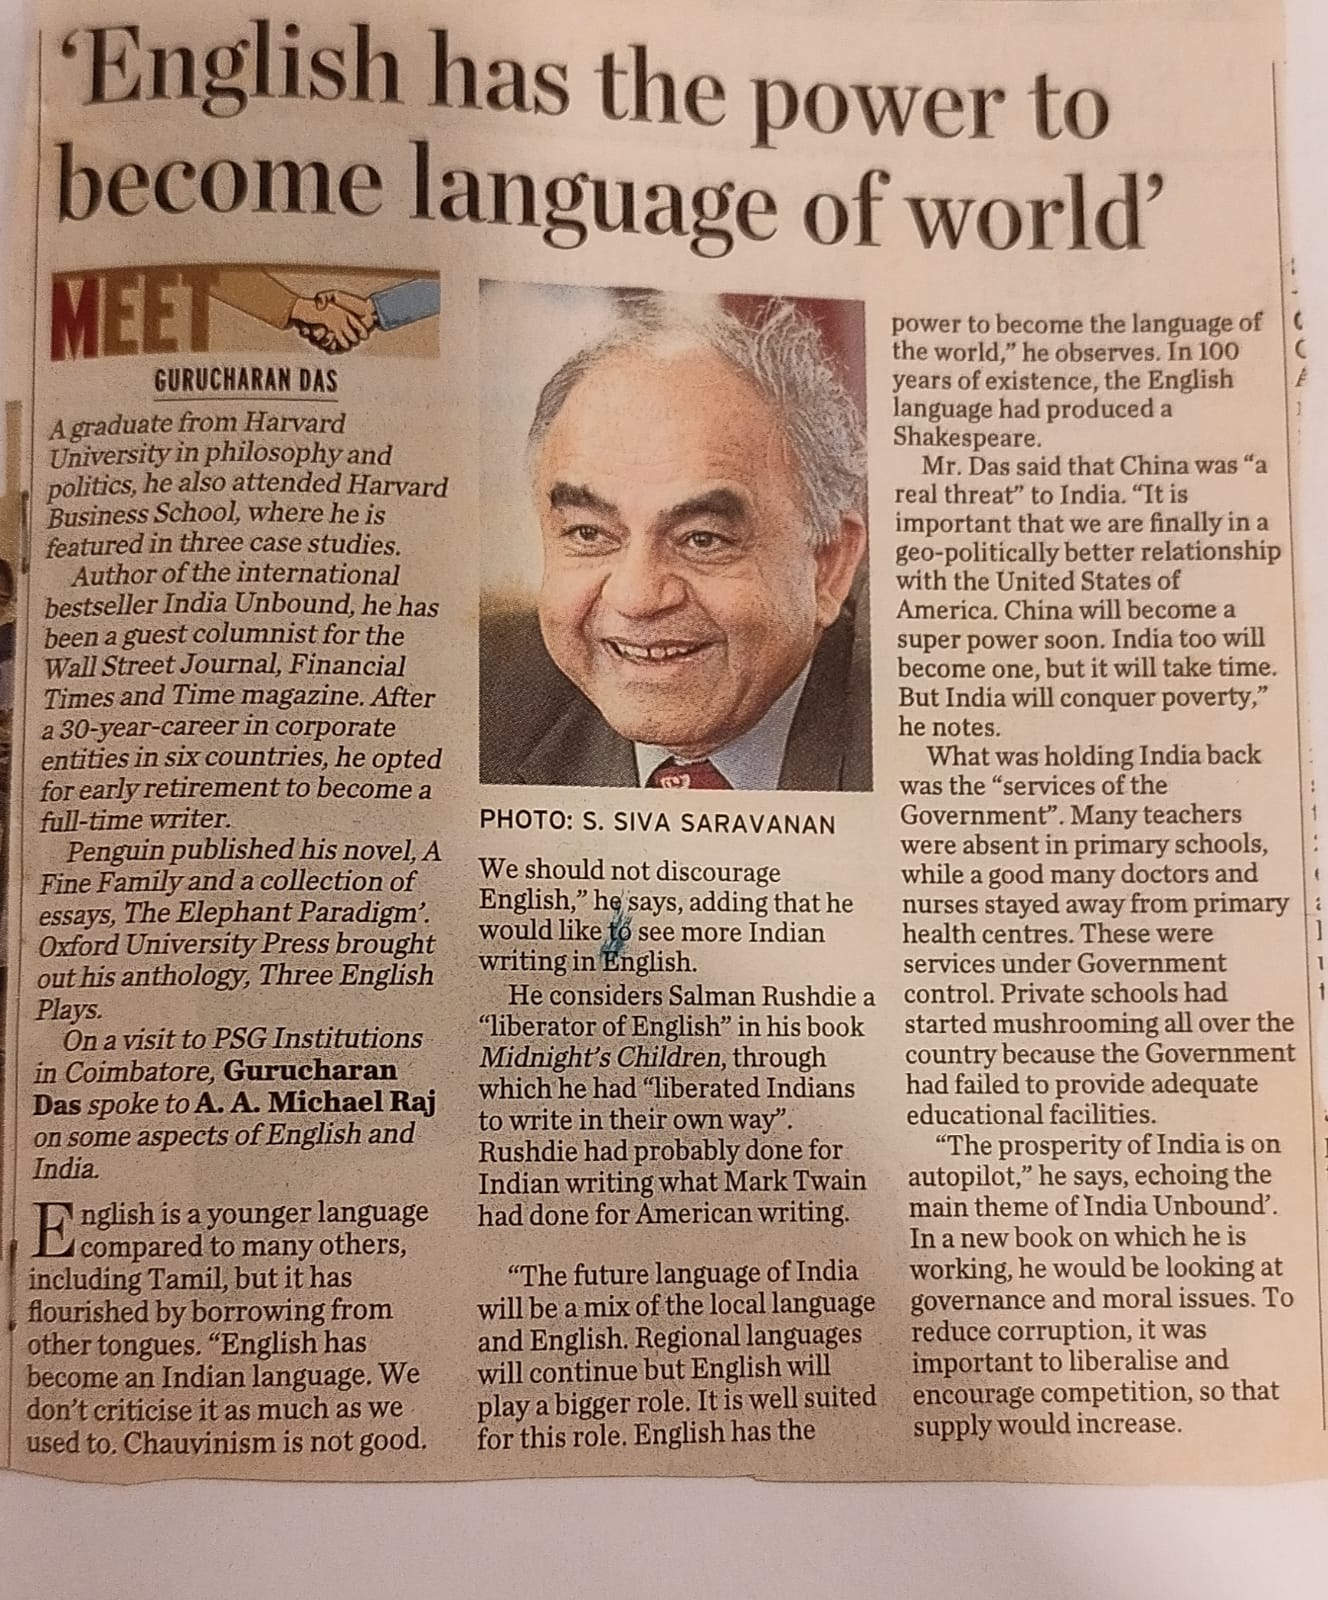 English has the power to become the language of the world